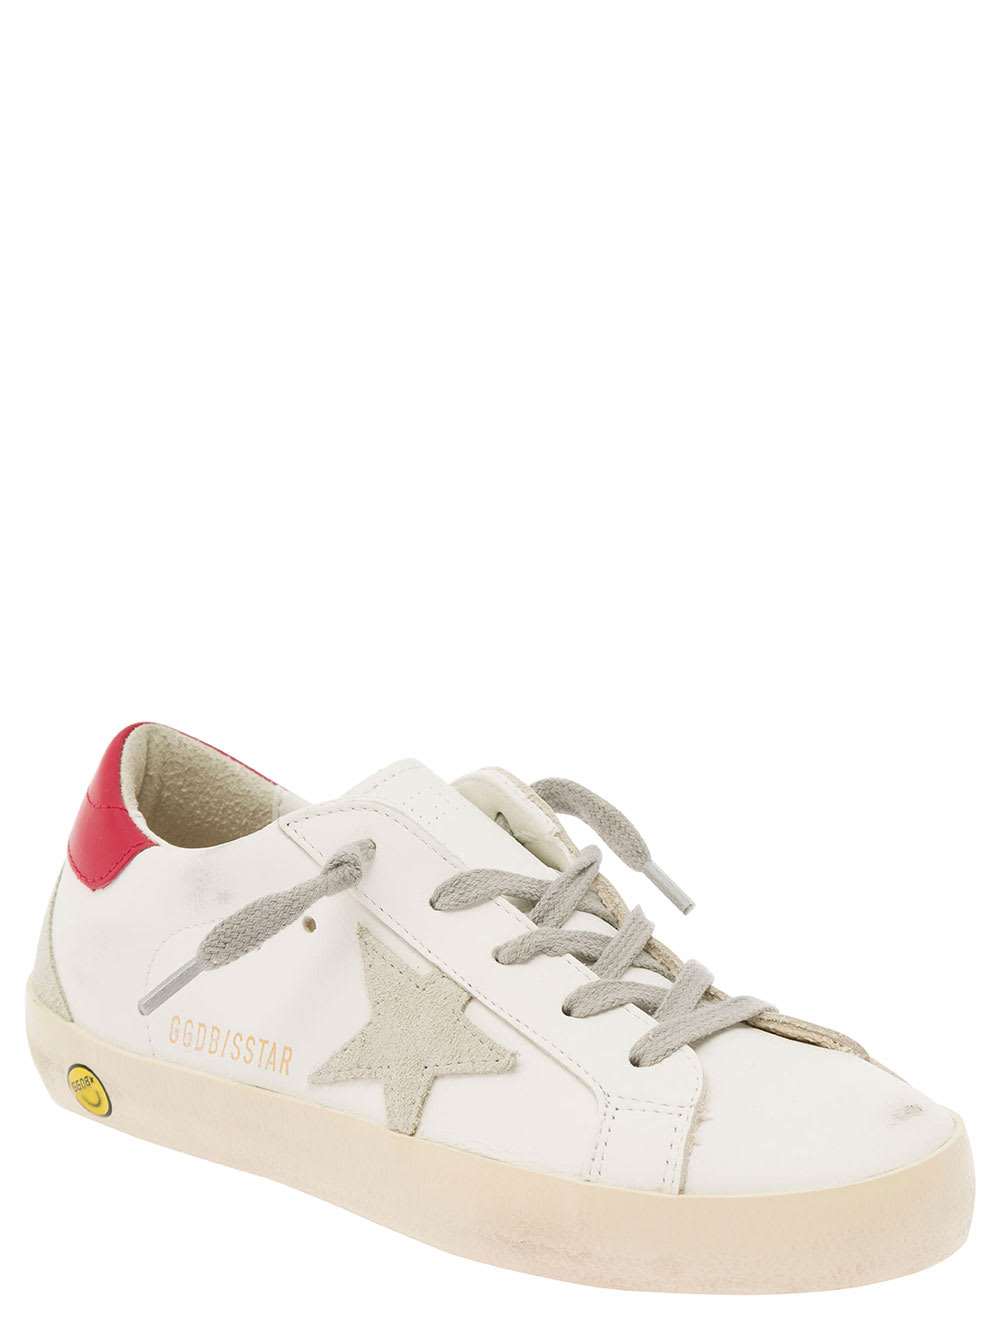 Shop Golden Goose Superstar White Low Top Sneakers With Star Patch In Leather Boy